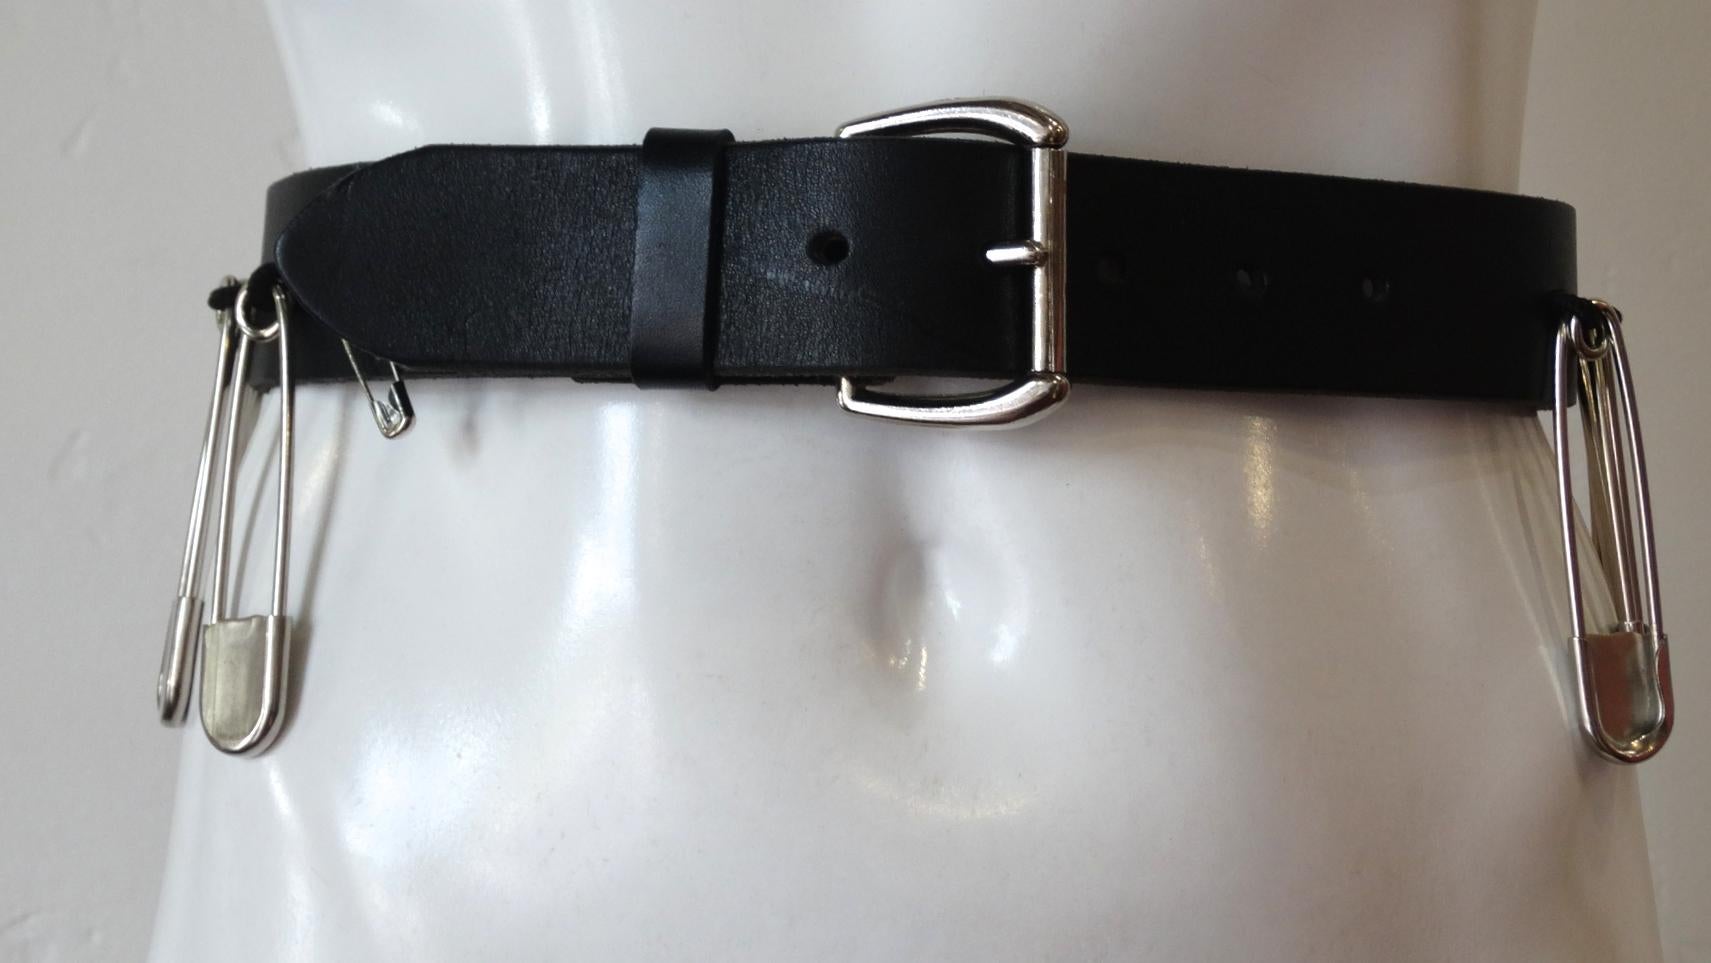 Make Your Outfit All The Talk With This Isaiah Kincaid Belt! Circa 1990s, this black leather belt features silver hardware and is decorated with large safety pins. Throw on with trousers, jeans or even an oversized button up shirt dress! Marked a